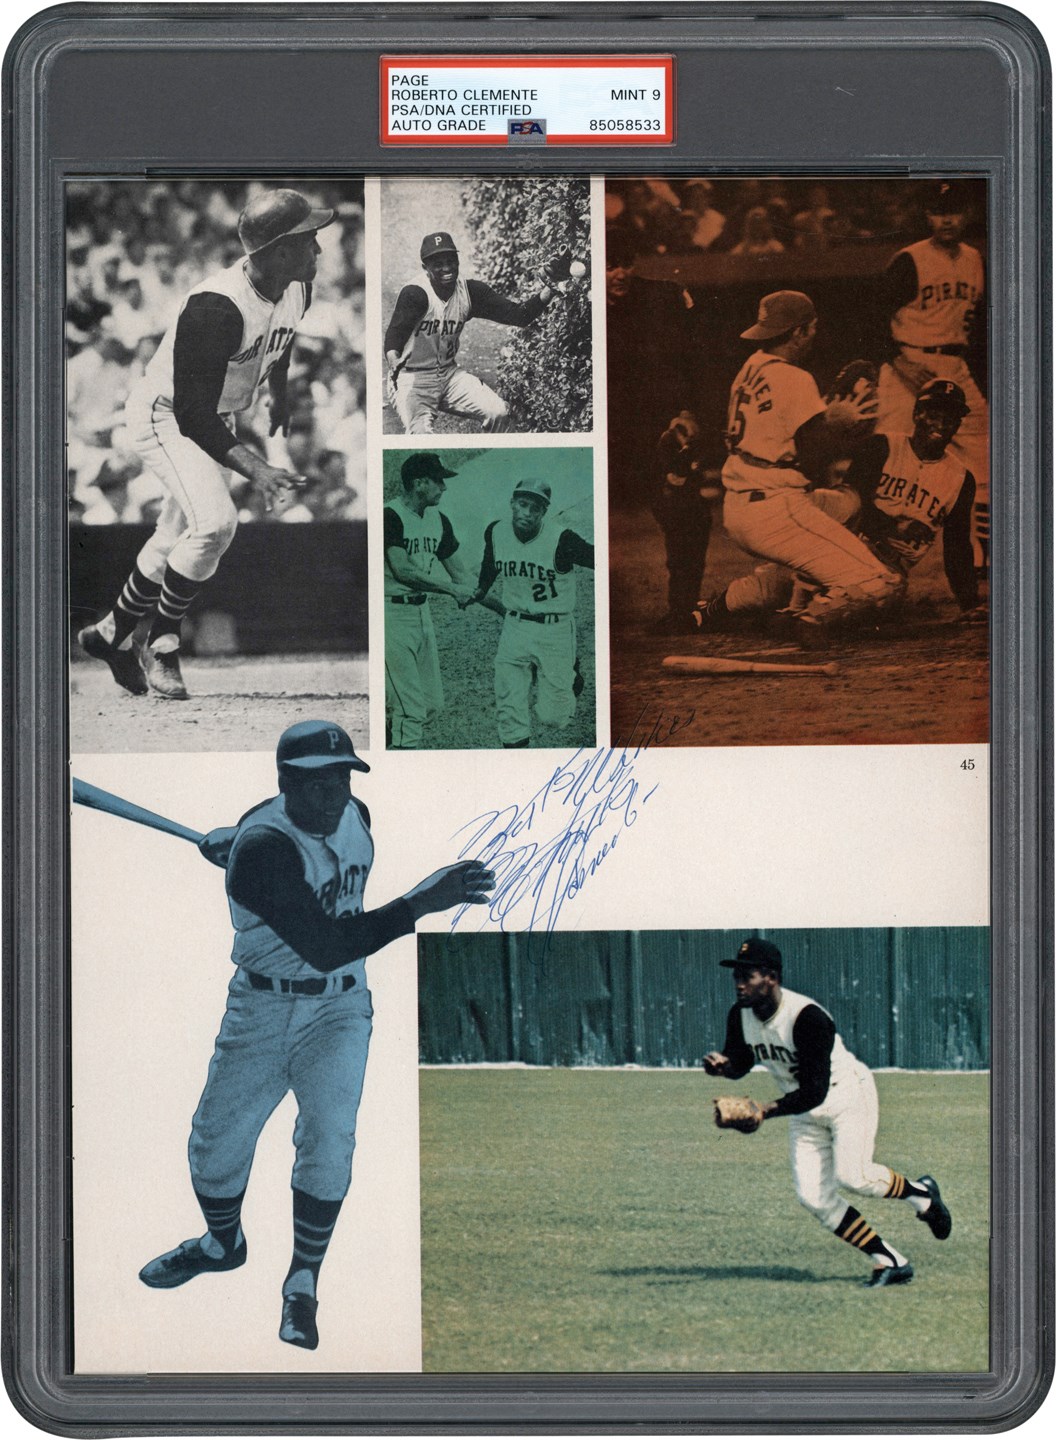 Clemente and Pittsburgh Pirates - Roberto Clemente Signed Yearbook Page (PSA MINT 9)